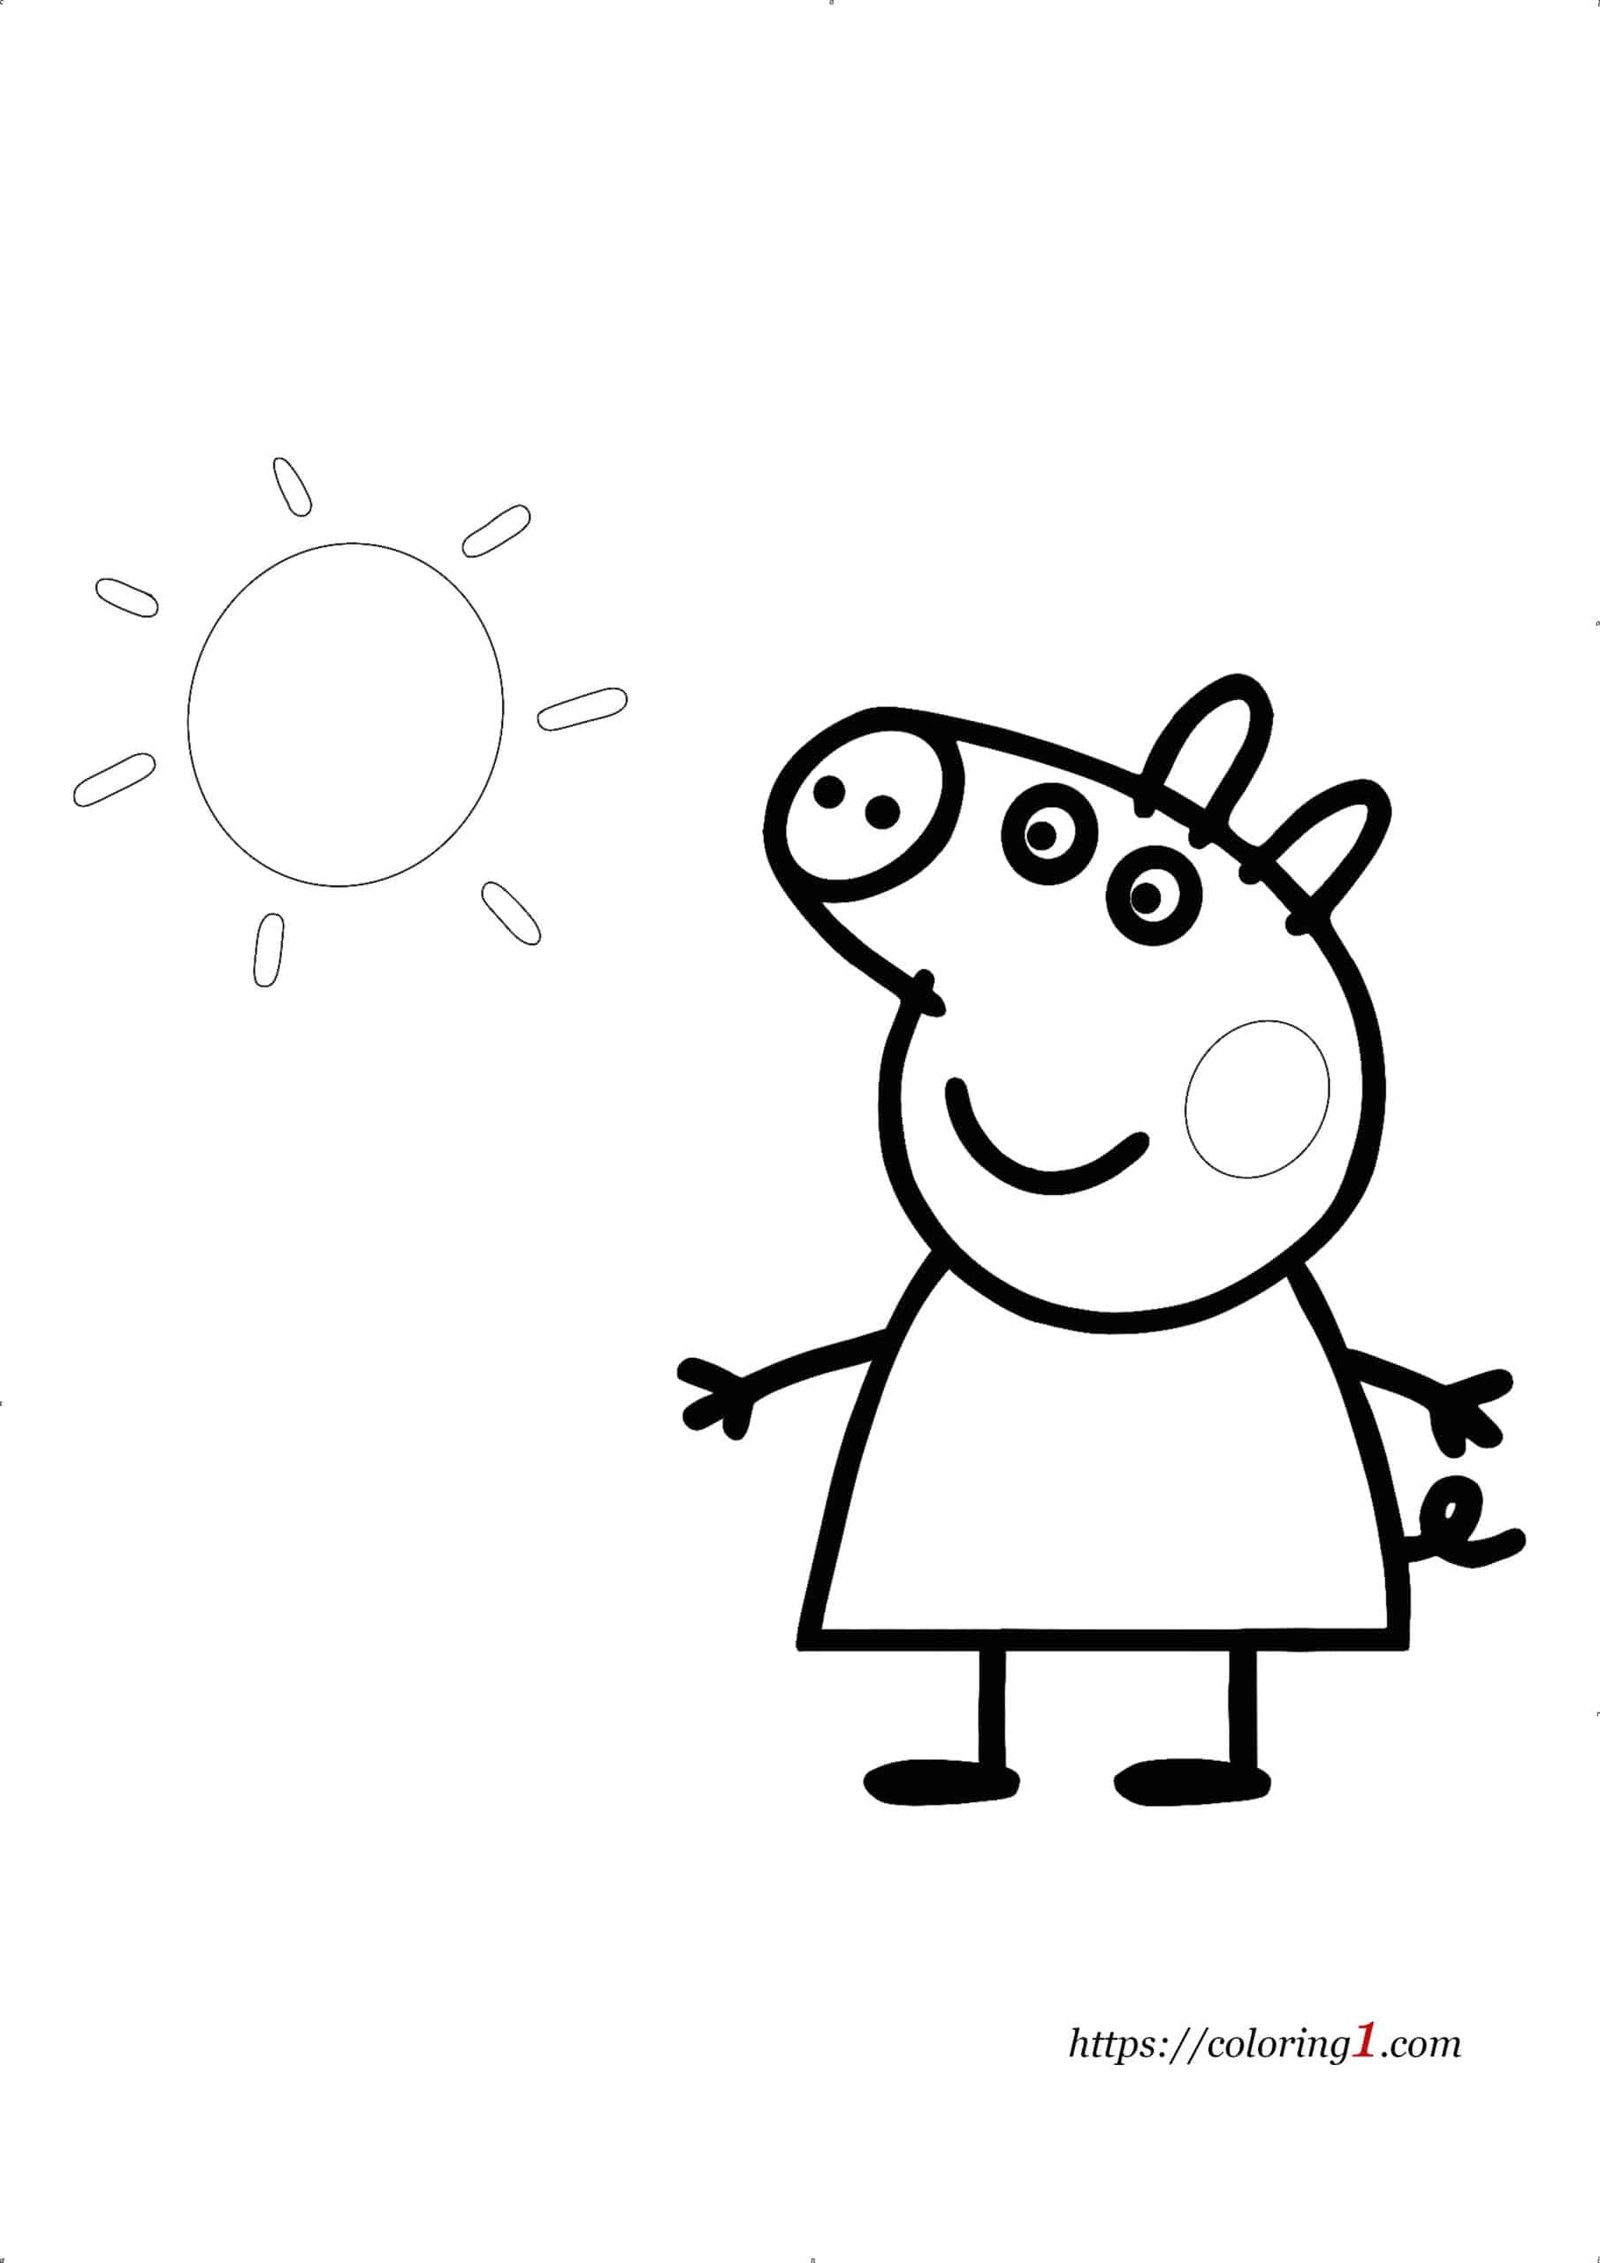 Easy Peppa Pig coloring page